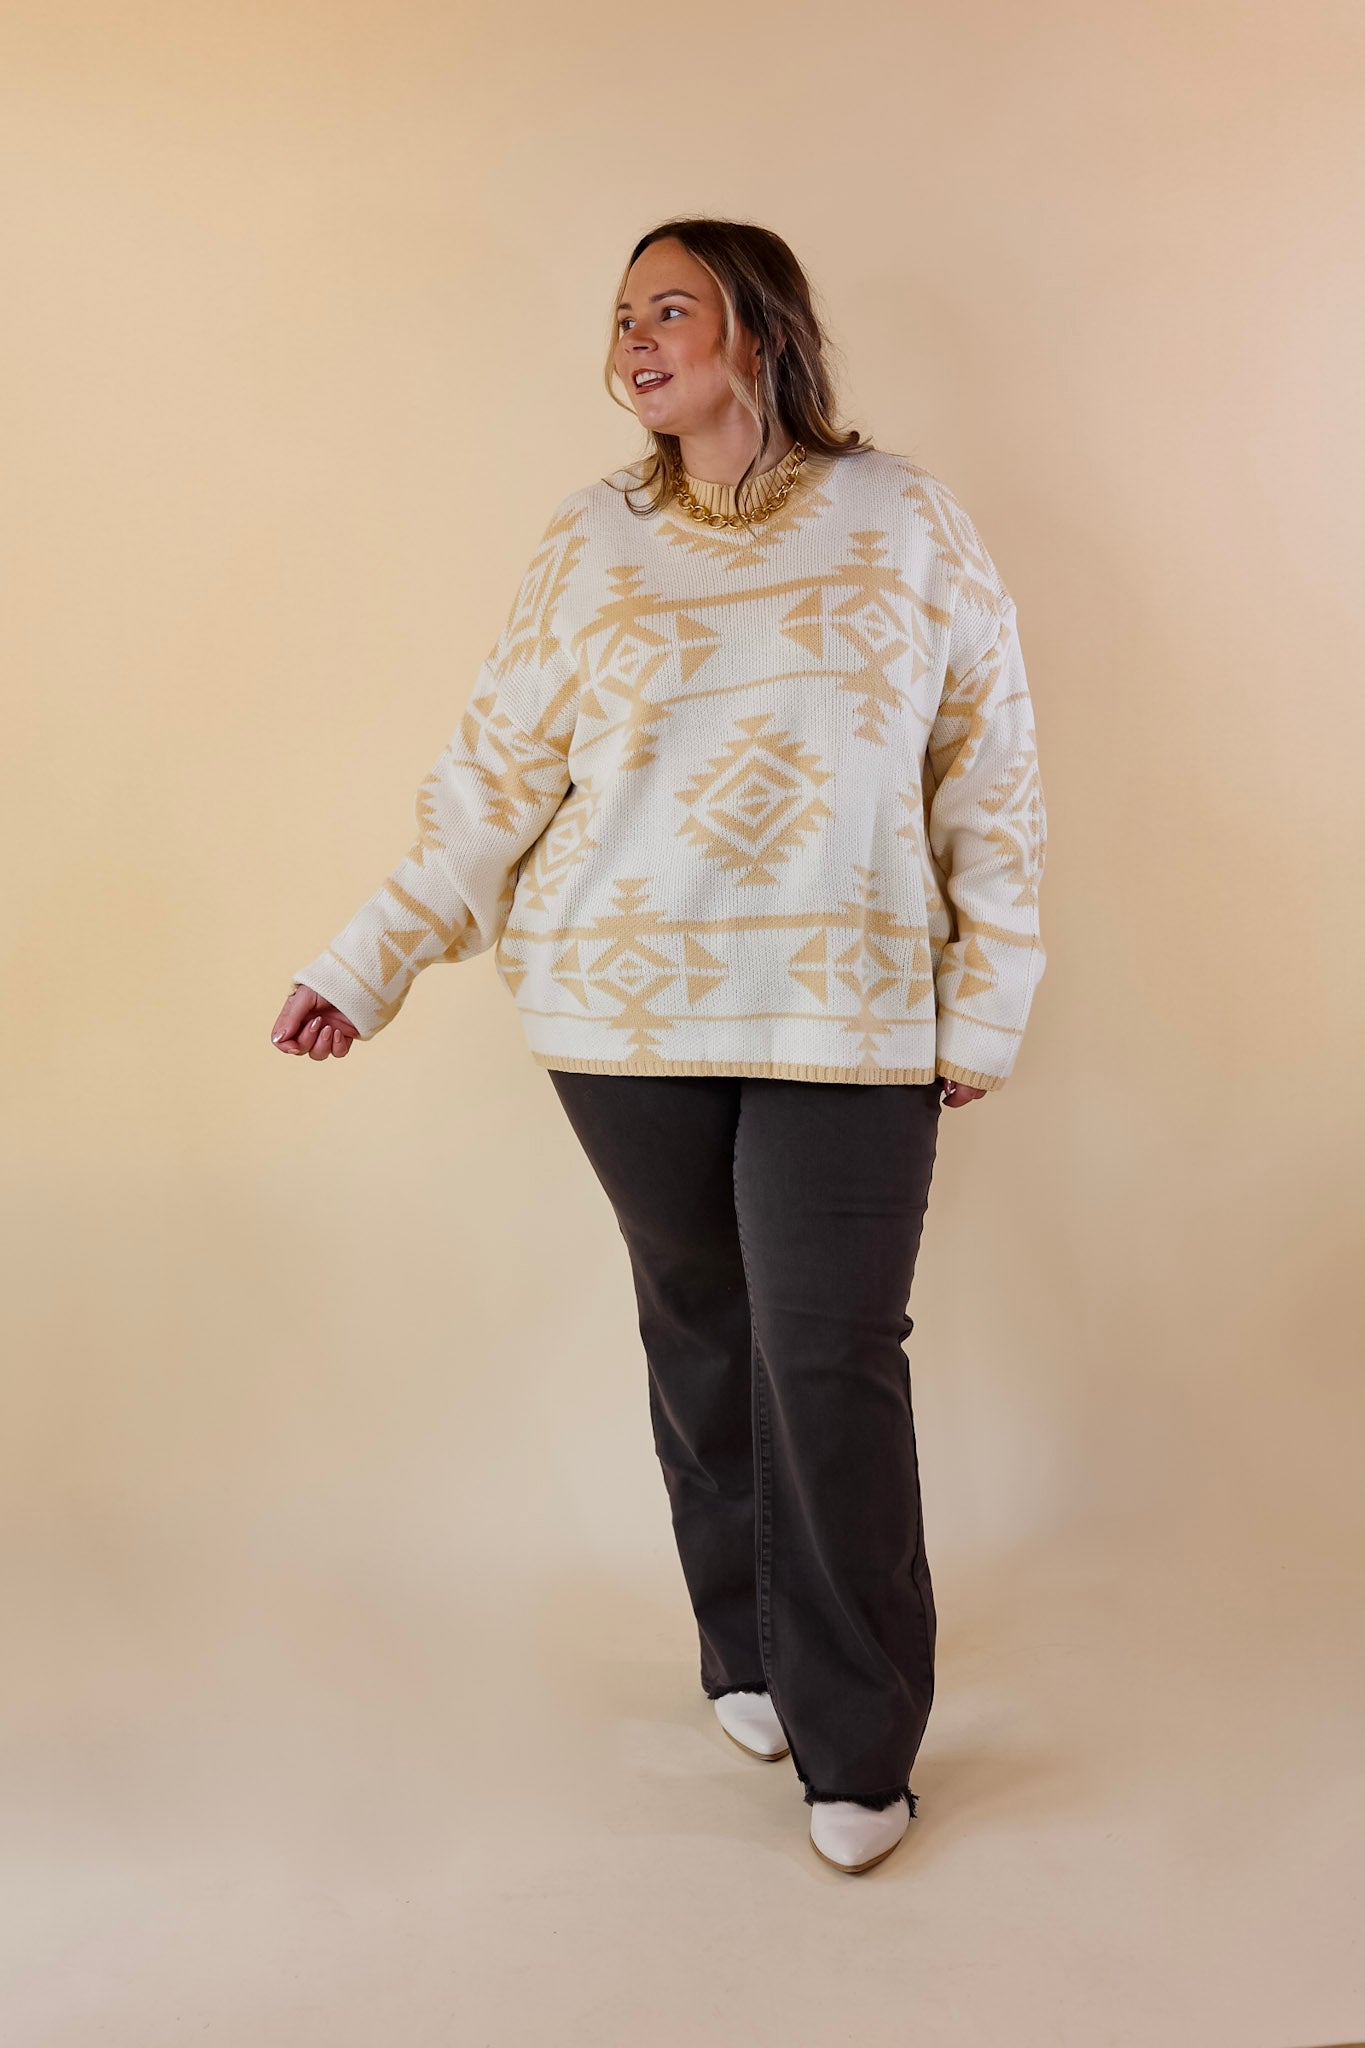 Cheyenne Chill Aztec Print Striped Sweater in Ivory and Beige - Giddy Up Glamour Boutique